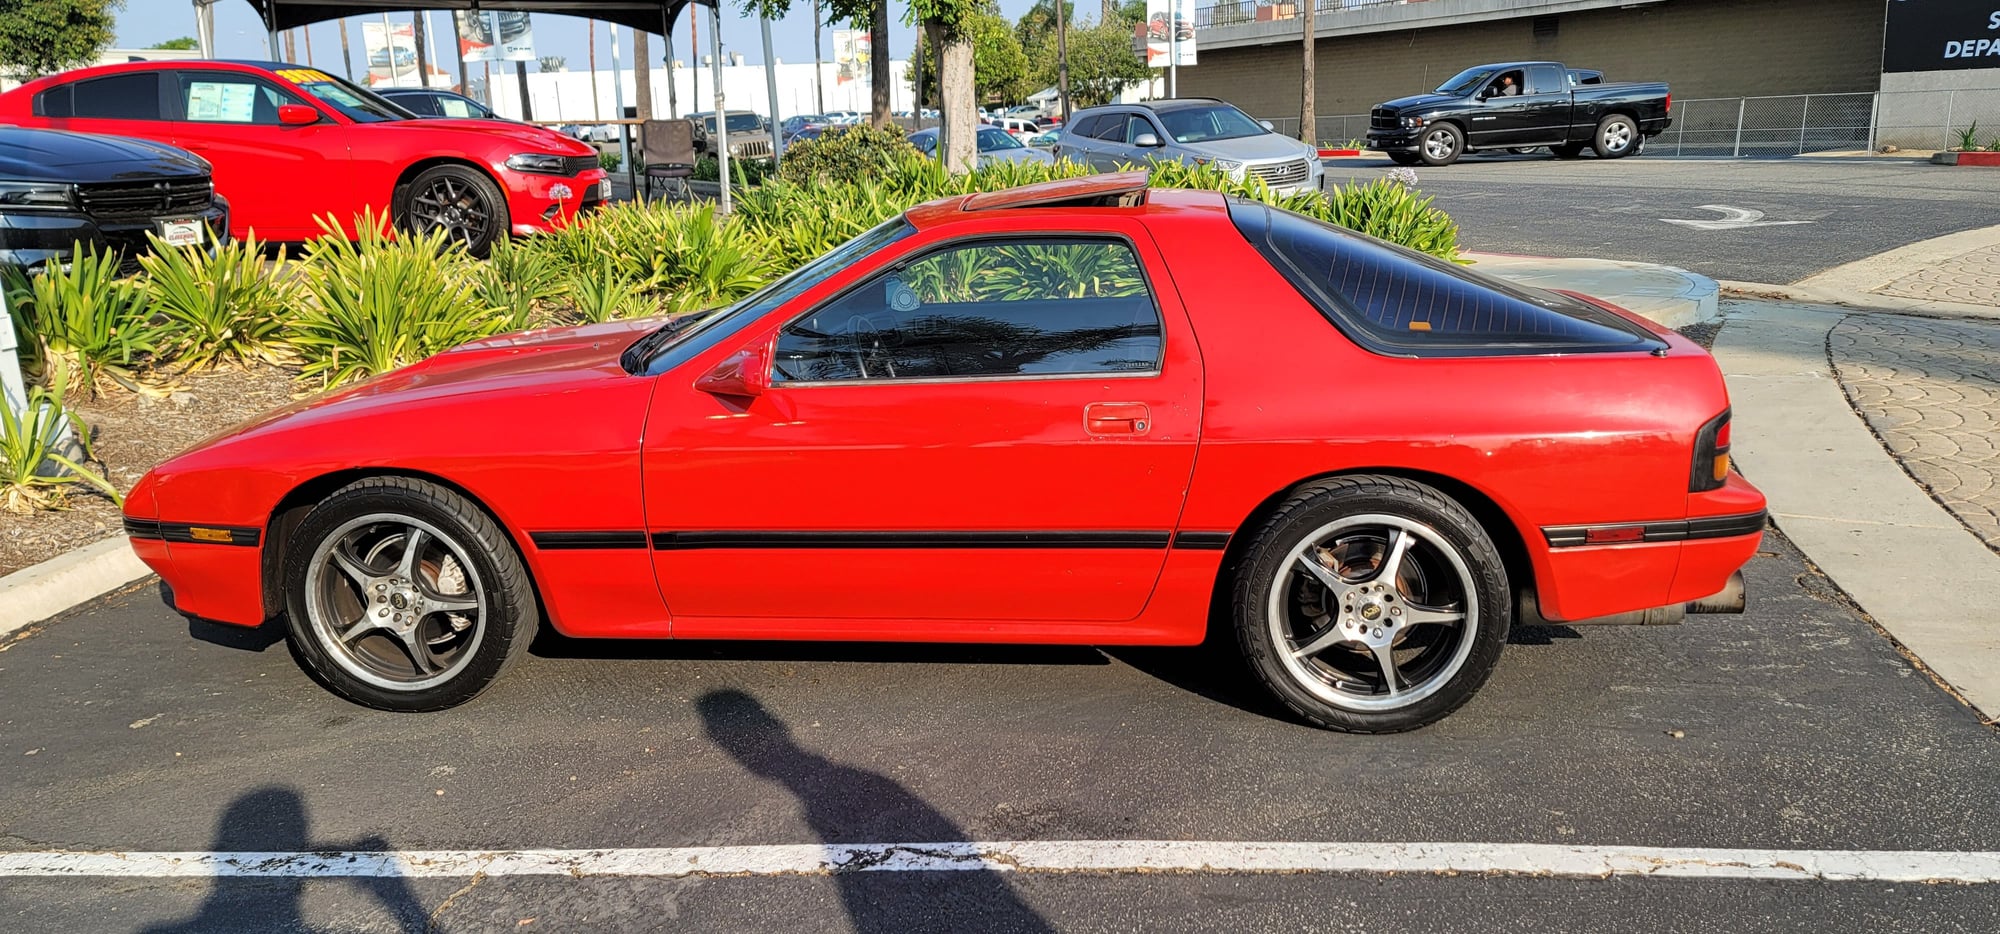 1987 Mazda RX-7 - 1987 Mazda RX7 Turbo II - Used - VIN jm1fc332xh0504552 - 114,137 Miles - Other - 2WD - Manual - Coupe - Red - Claremont, CA 91711, United States